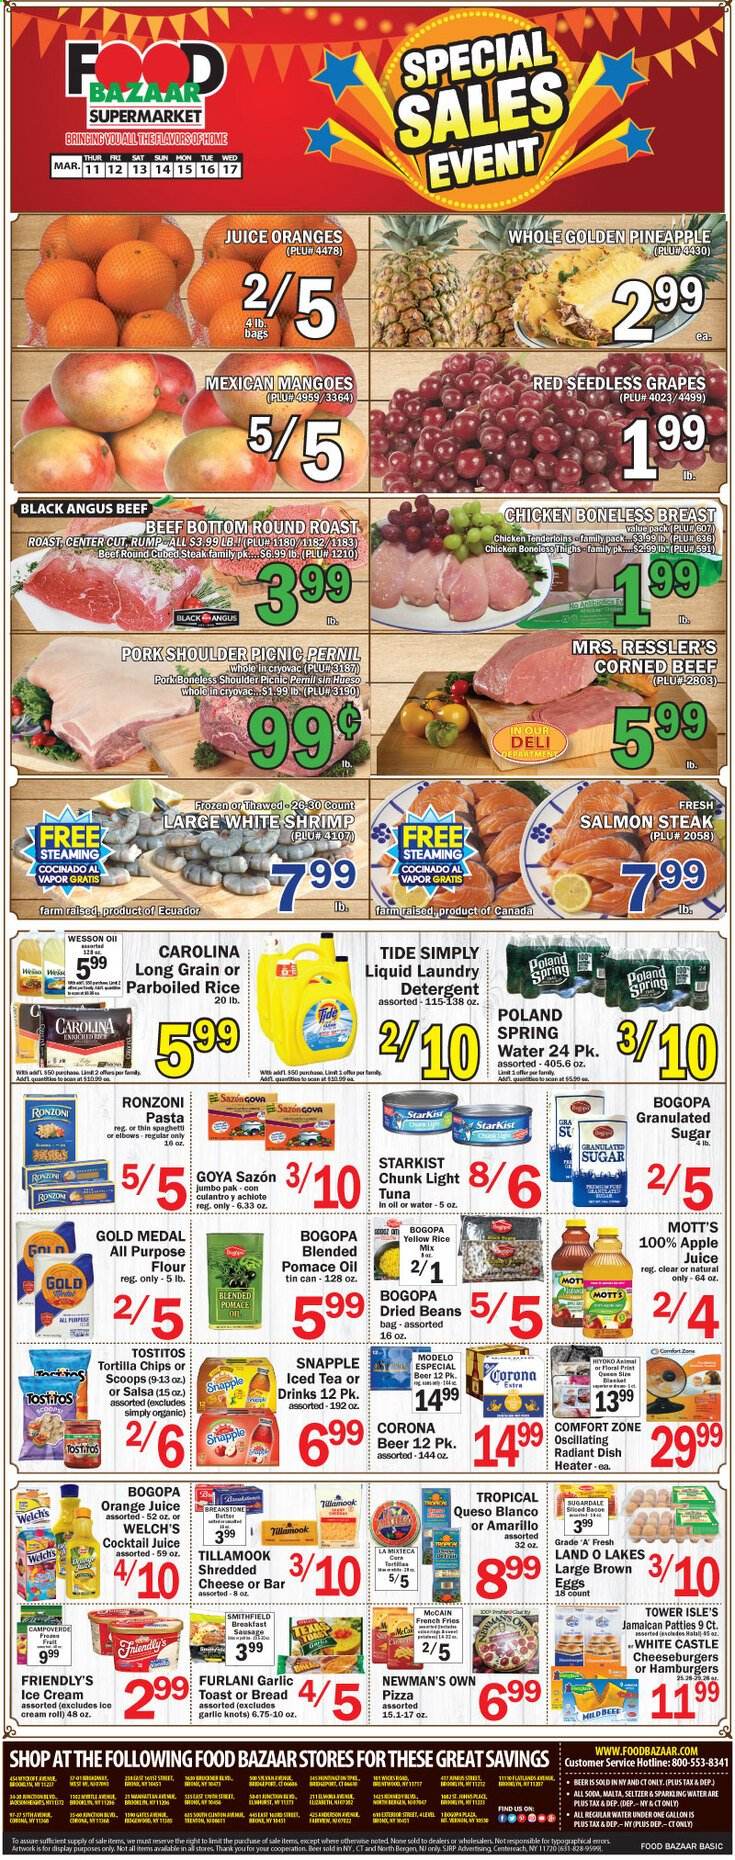 thumbnail - Food Bazaar Flyer - 03/11/2021 - 03/17/2021 - Sales products - seedless grapes, bread, toast bread, salmon, tuna, shrimps, StarKist, pizza, Welch's, bacon, sausage, eggs, salsa, ice cream, Friendly's Ice Cream, beans, mango, McCain, tortilla chips, Tostitos, all purpose flour, flour, granulated sugar, sugar, garlic, light tuna, Goya, rice, spaghetti, pasta, parboiled rice, oil, apple juice, orange juice, soda, juice, Snapple, Mott's, seltzer water, spring water, sparkling water, beer, Corona Extra, Castle, Modelo, beef meat, corned beef, steak, round roast, pork meat, pork shoulder, grapes, pineapple. Page 1.